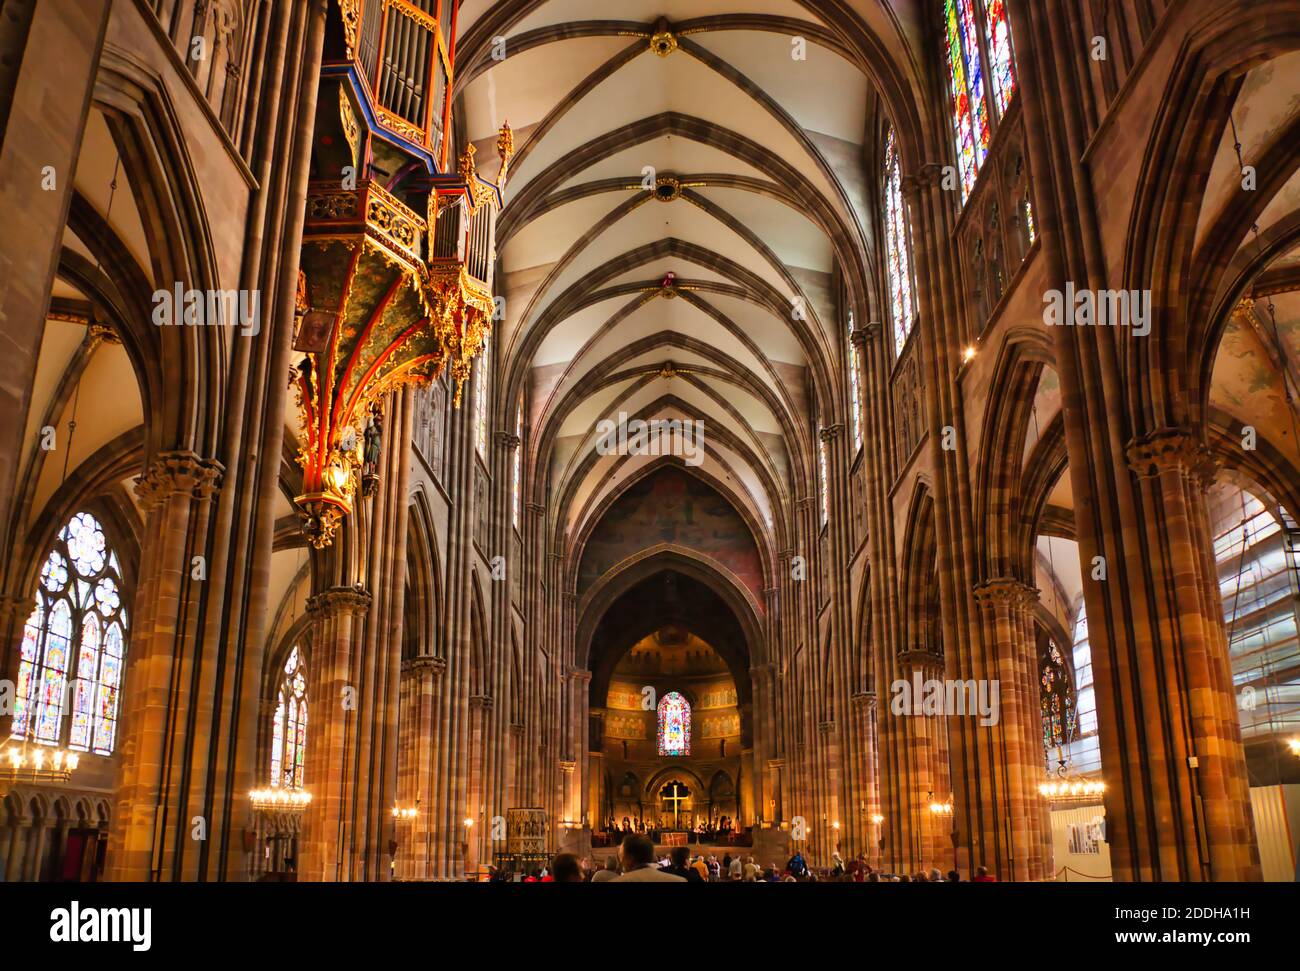 The interior of Strasbourg Cathedral with a view through the pillars and a beautiful roof overhead Stock Photo